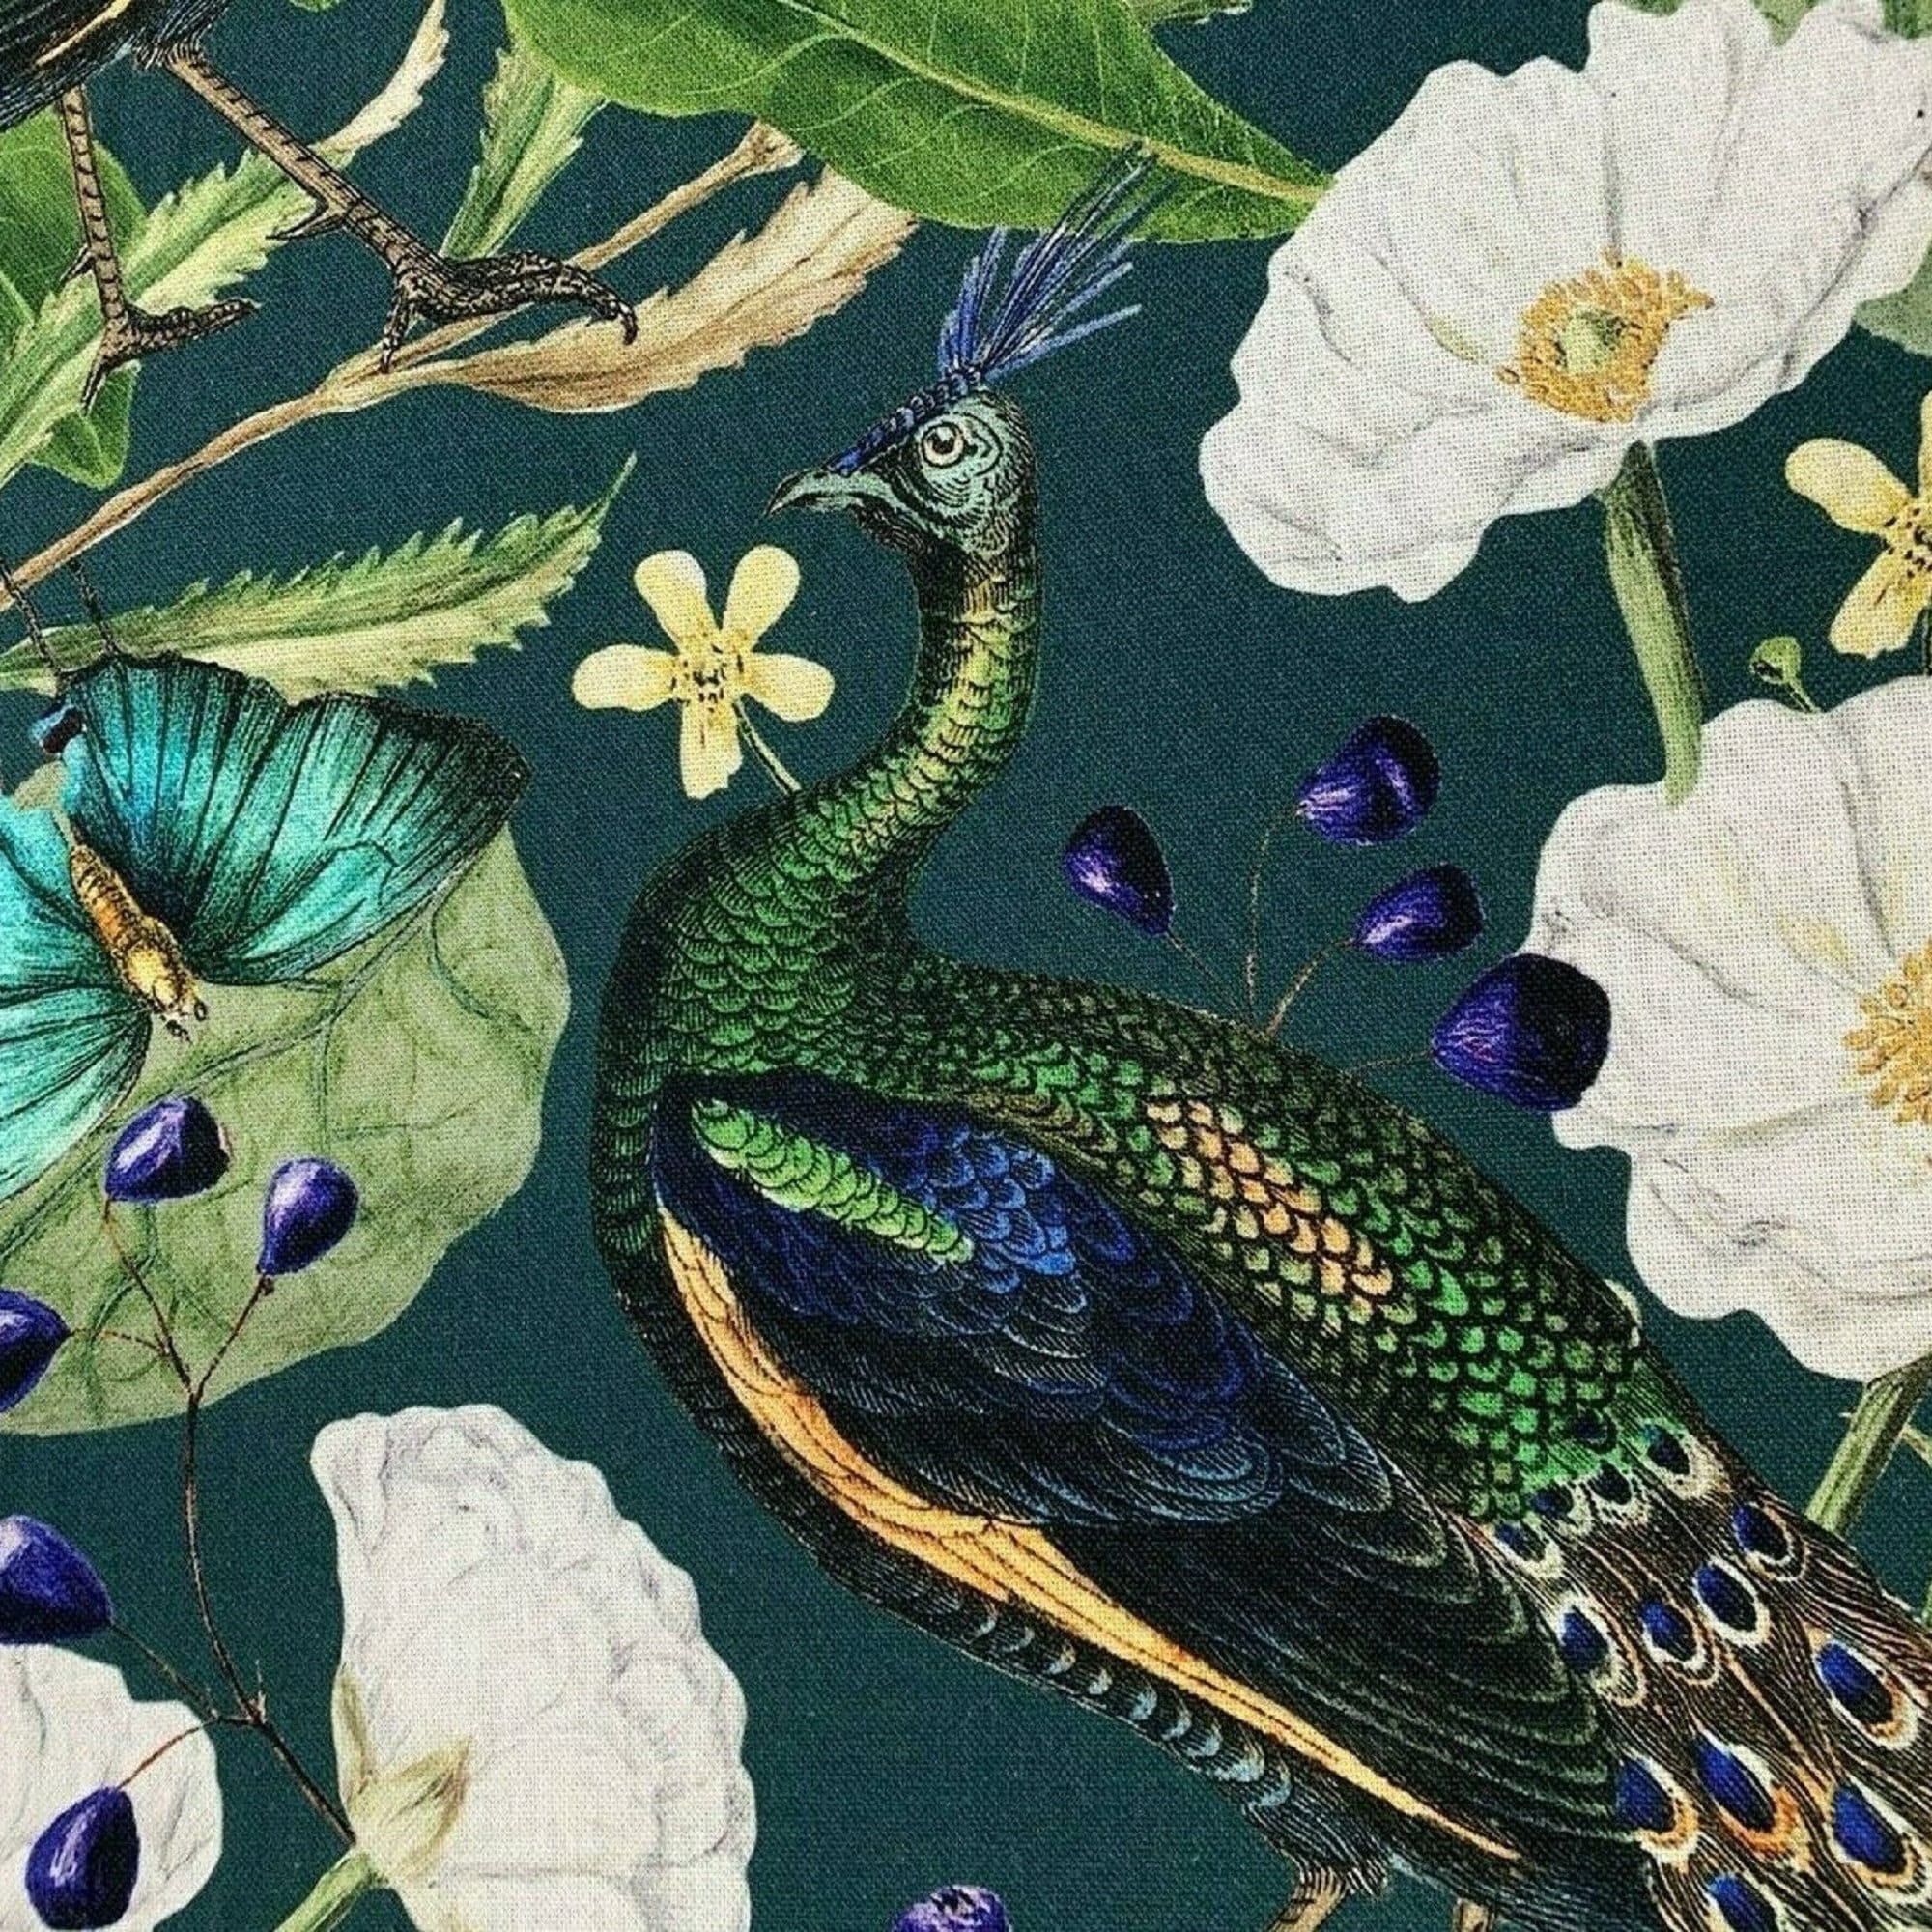 fabric panel - peacock - illustration (1). For sewing, patchwork, quilting.  Fabric panels, quilt panels, floral panel, peacock fabric, bird